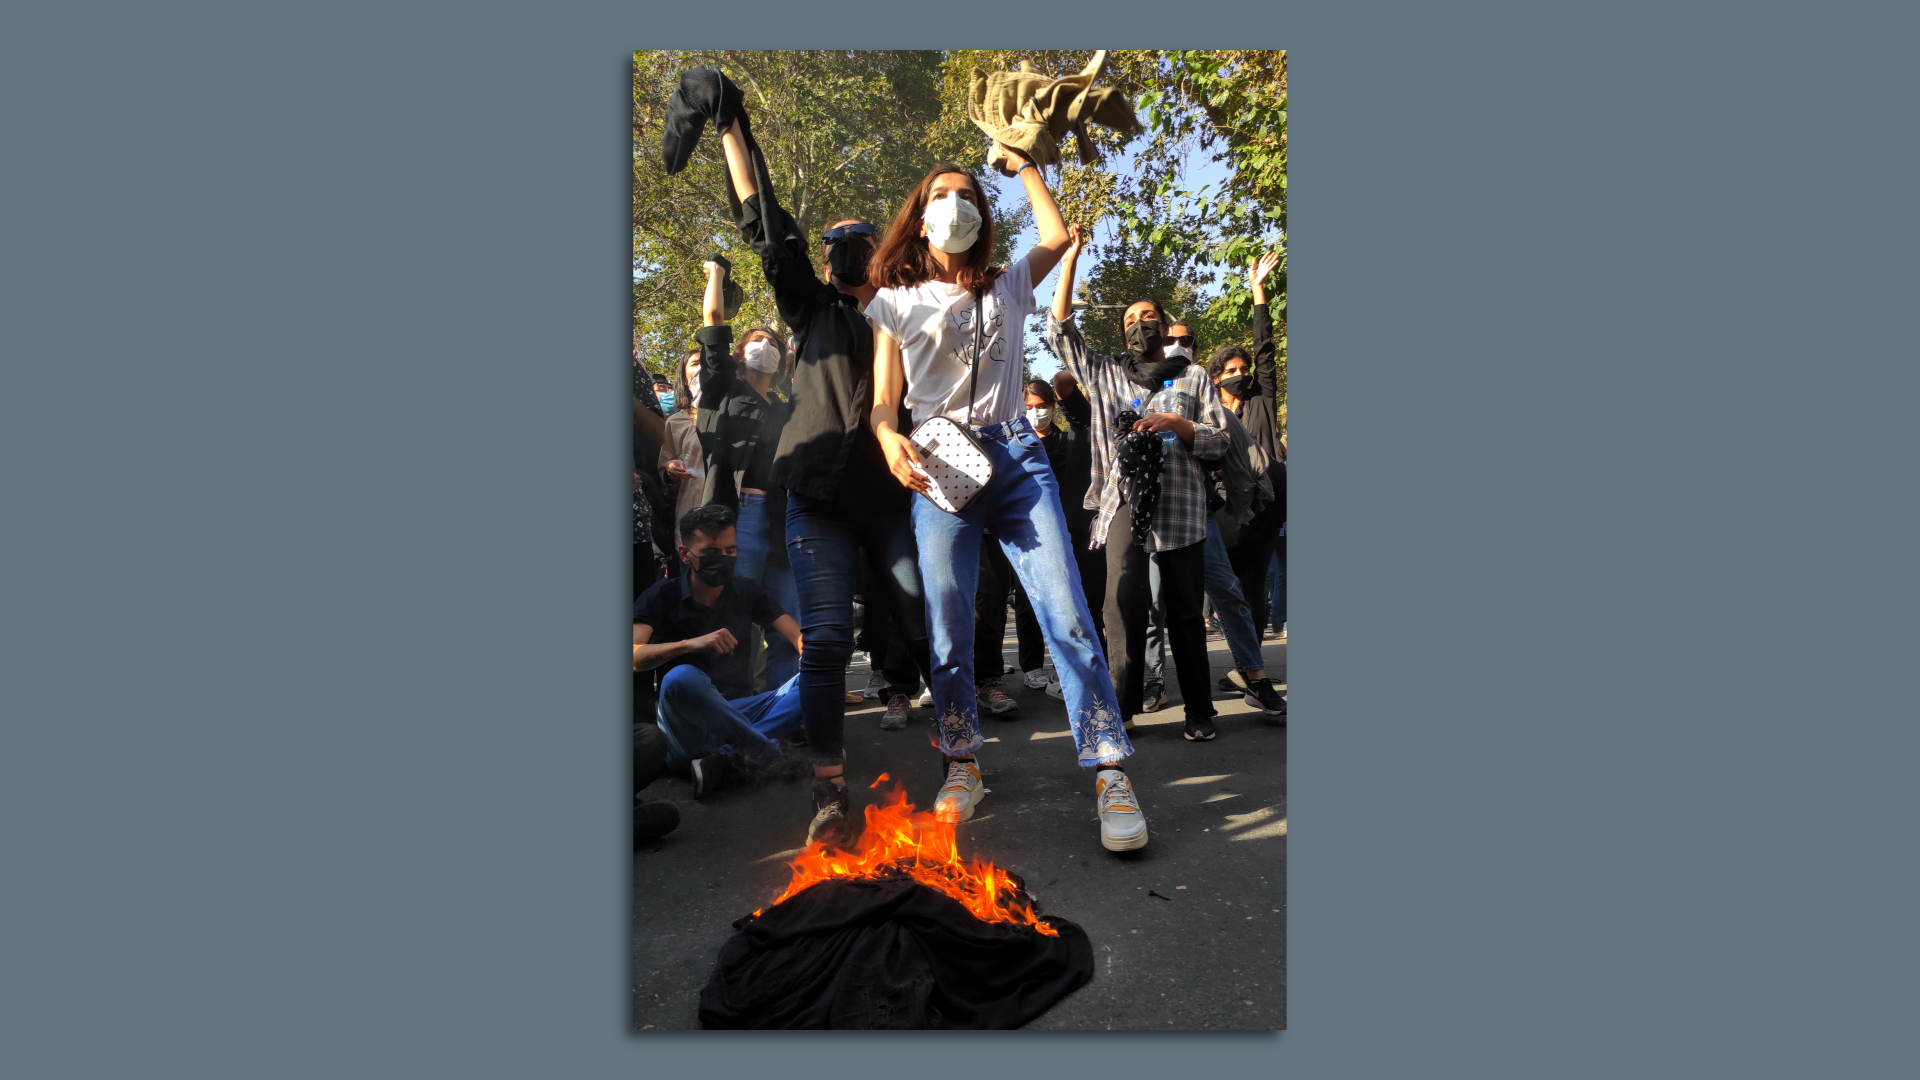 Iranian protesters set their scarves on fire while marching down a street on Oct. 1 in Tehran, Iran. Photo: Getty Images